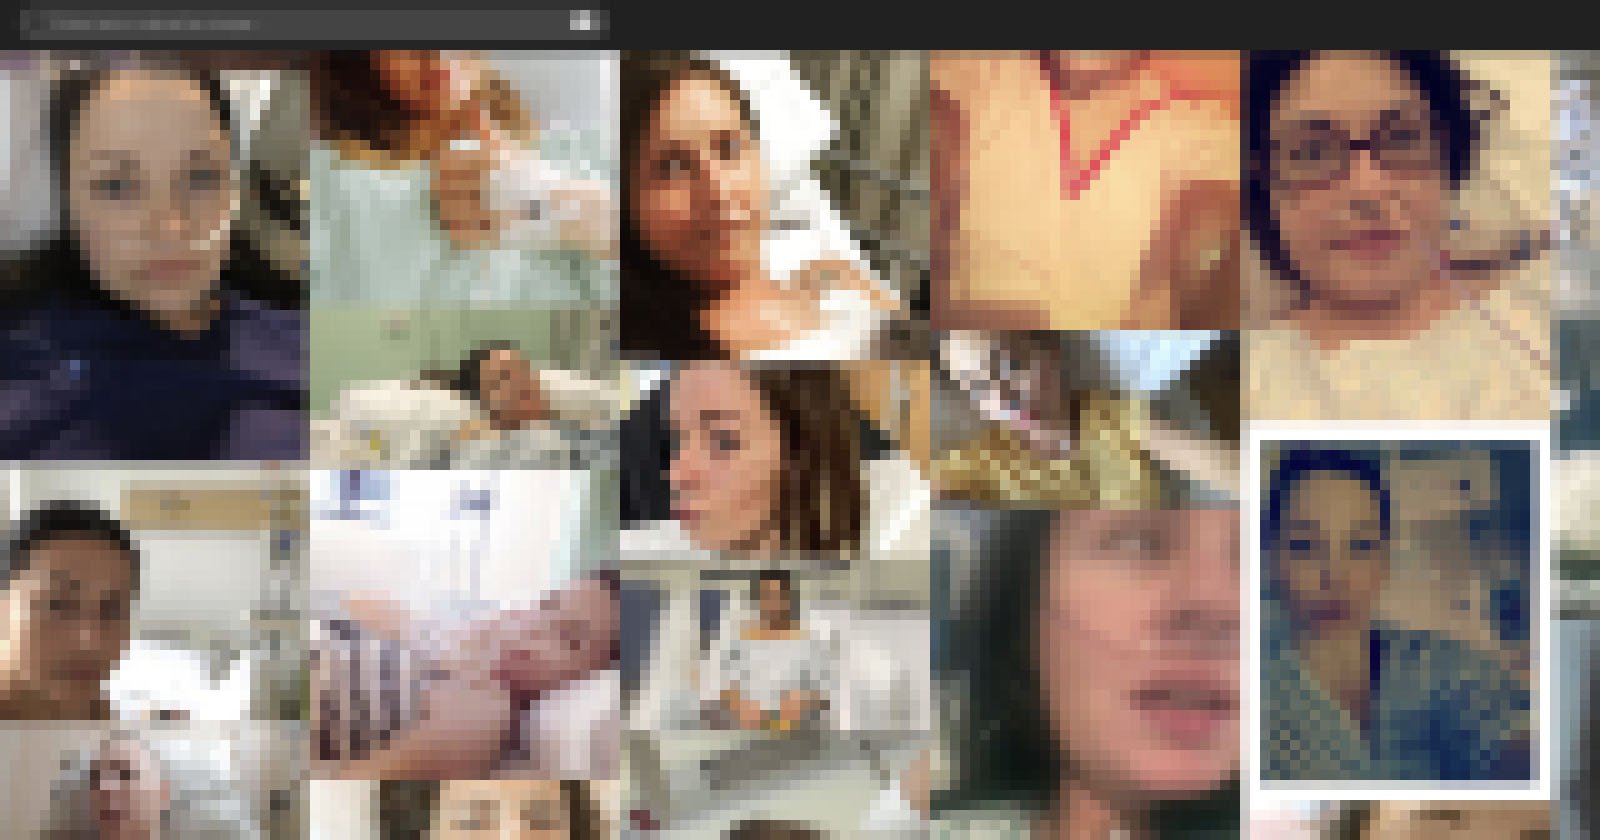 Shocked Artist Finds Private Medical Photos in AI Training Data Set